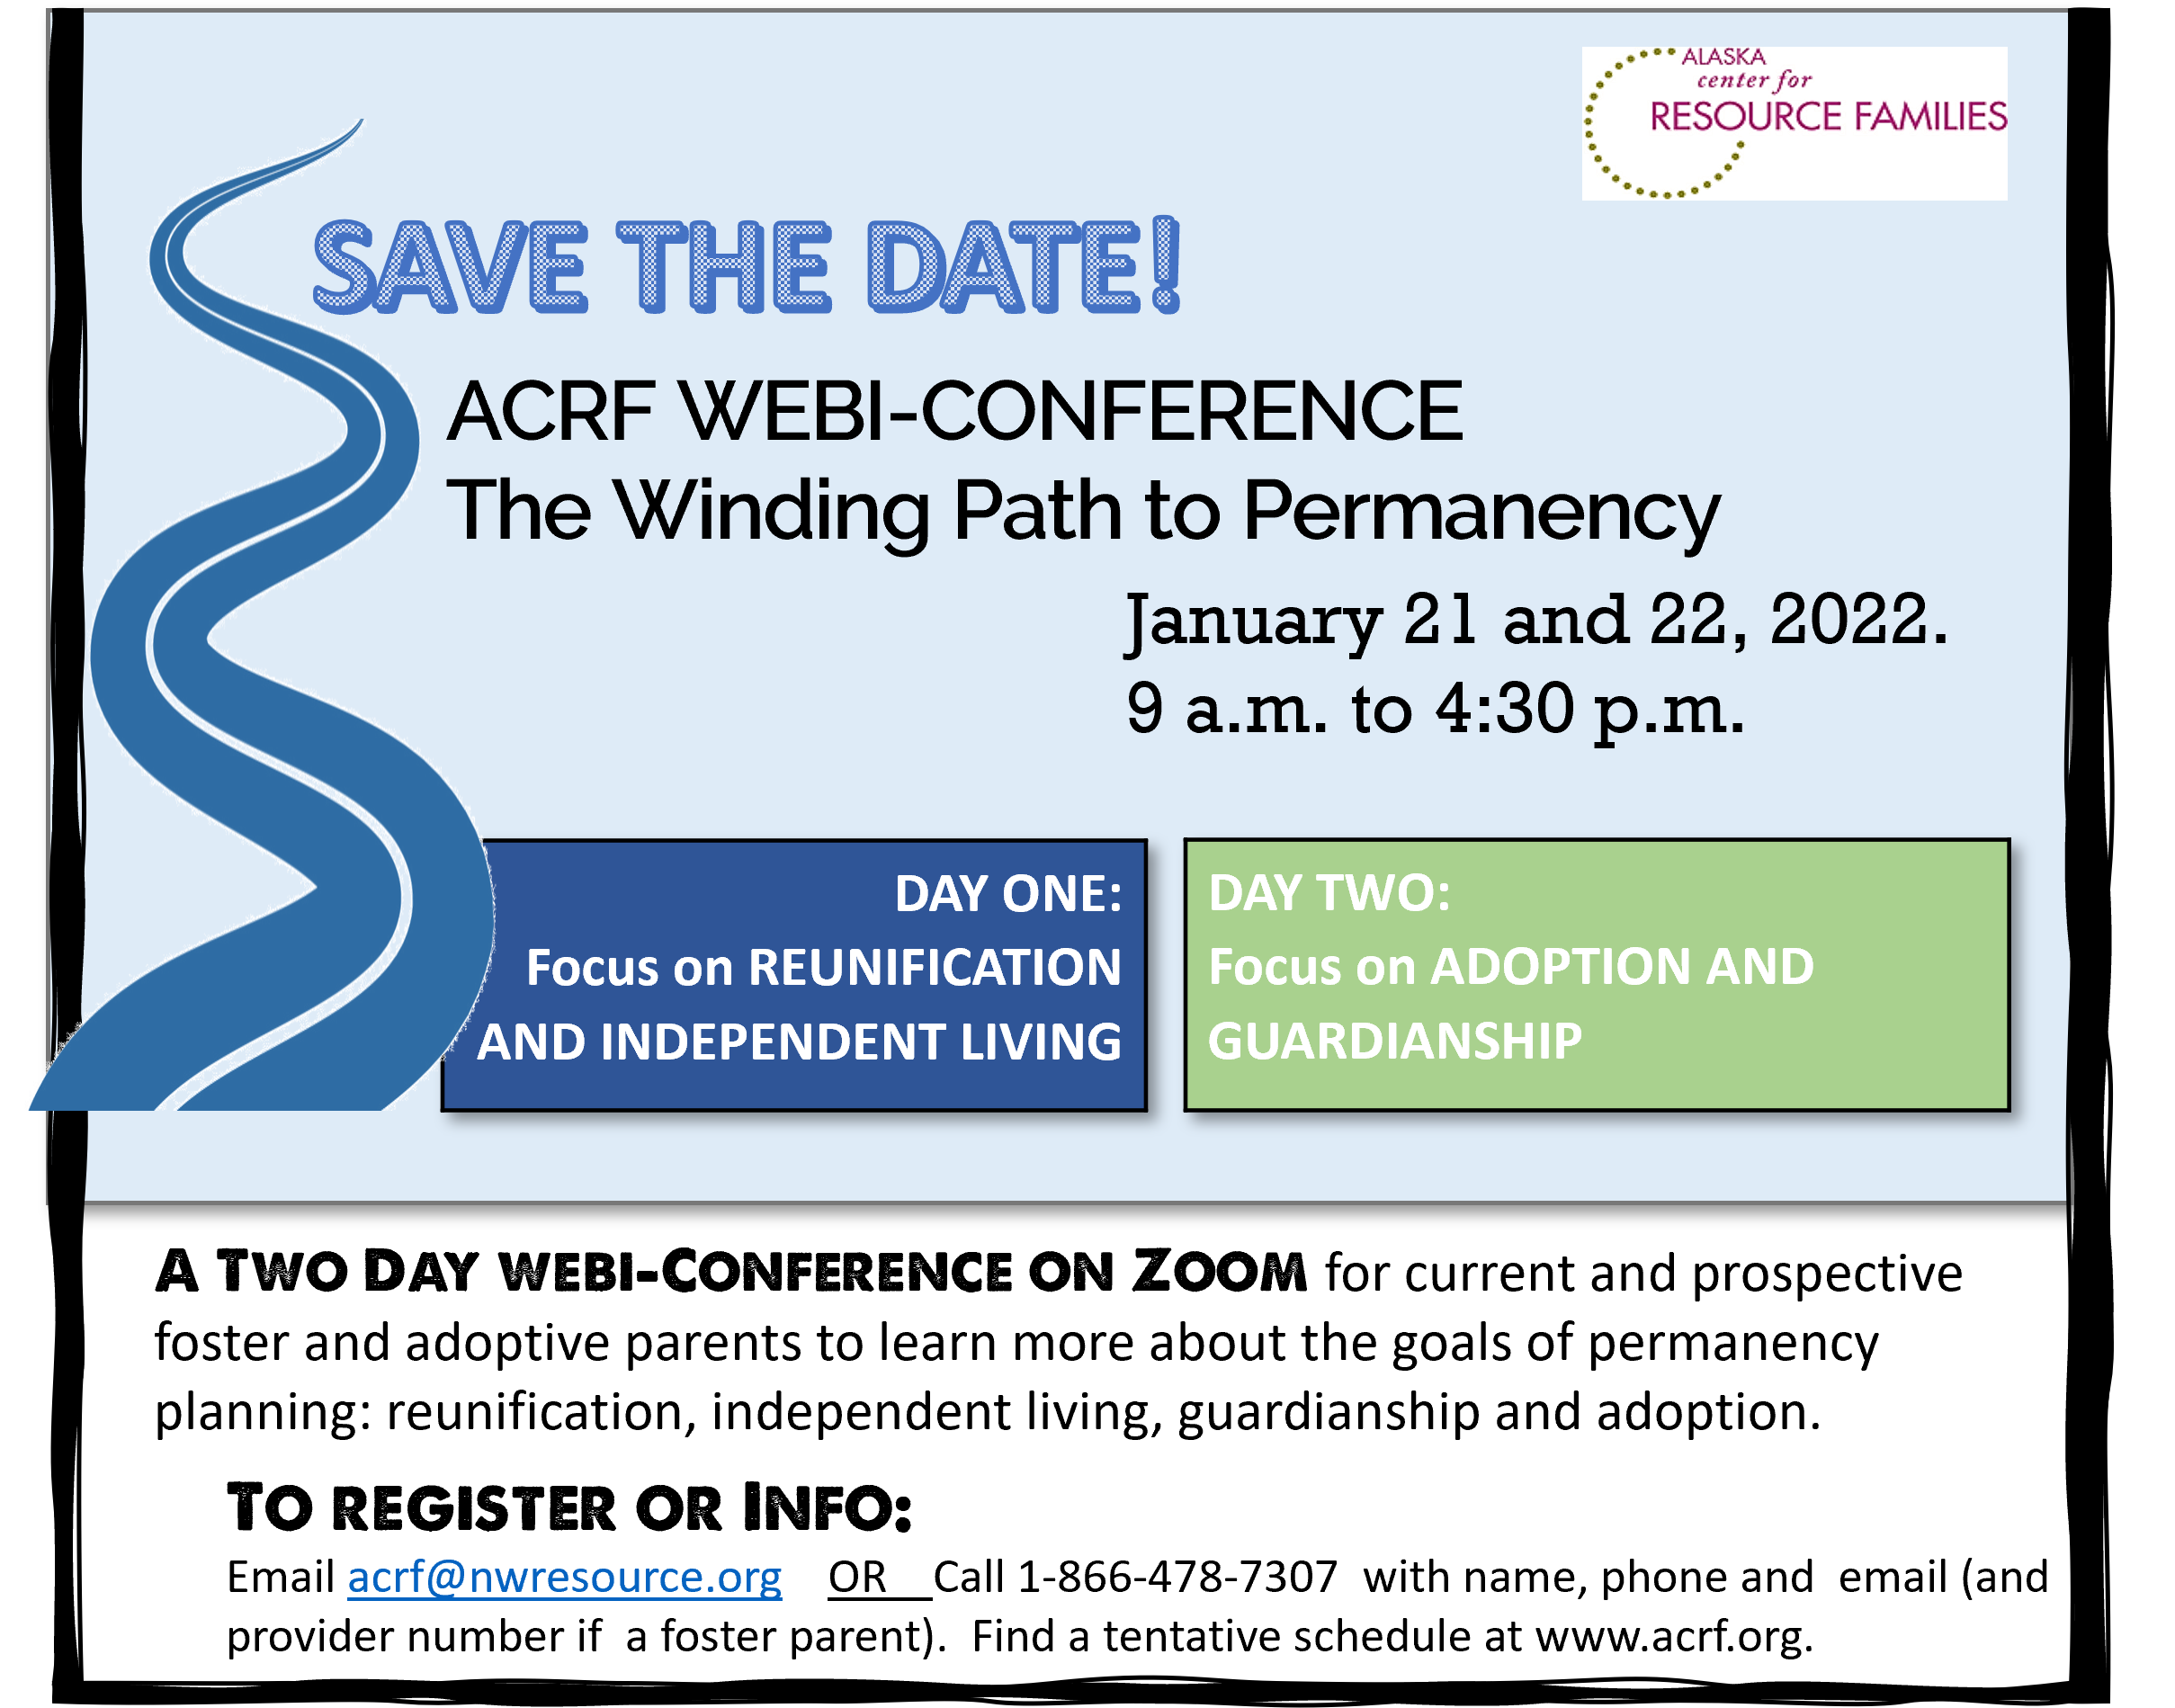 Save the Date! ACRF Webi-Conference "The Winding Path to Permanency. January 21 and 22, 2022. 9 a.m. to 4:30 p.m.